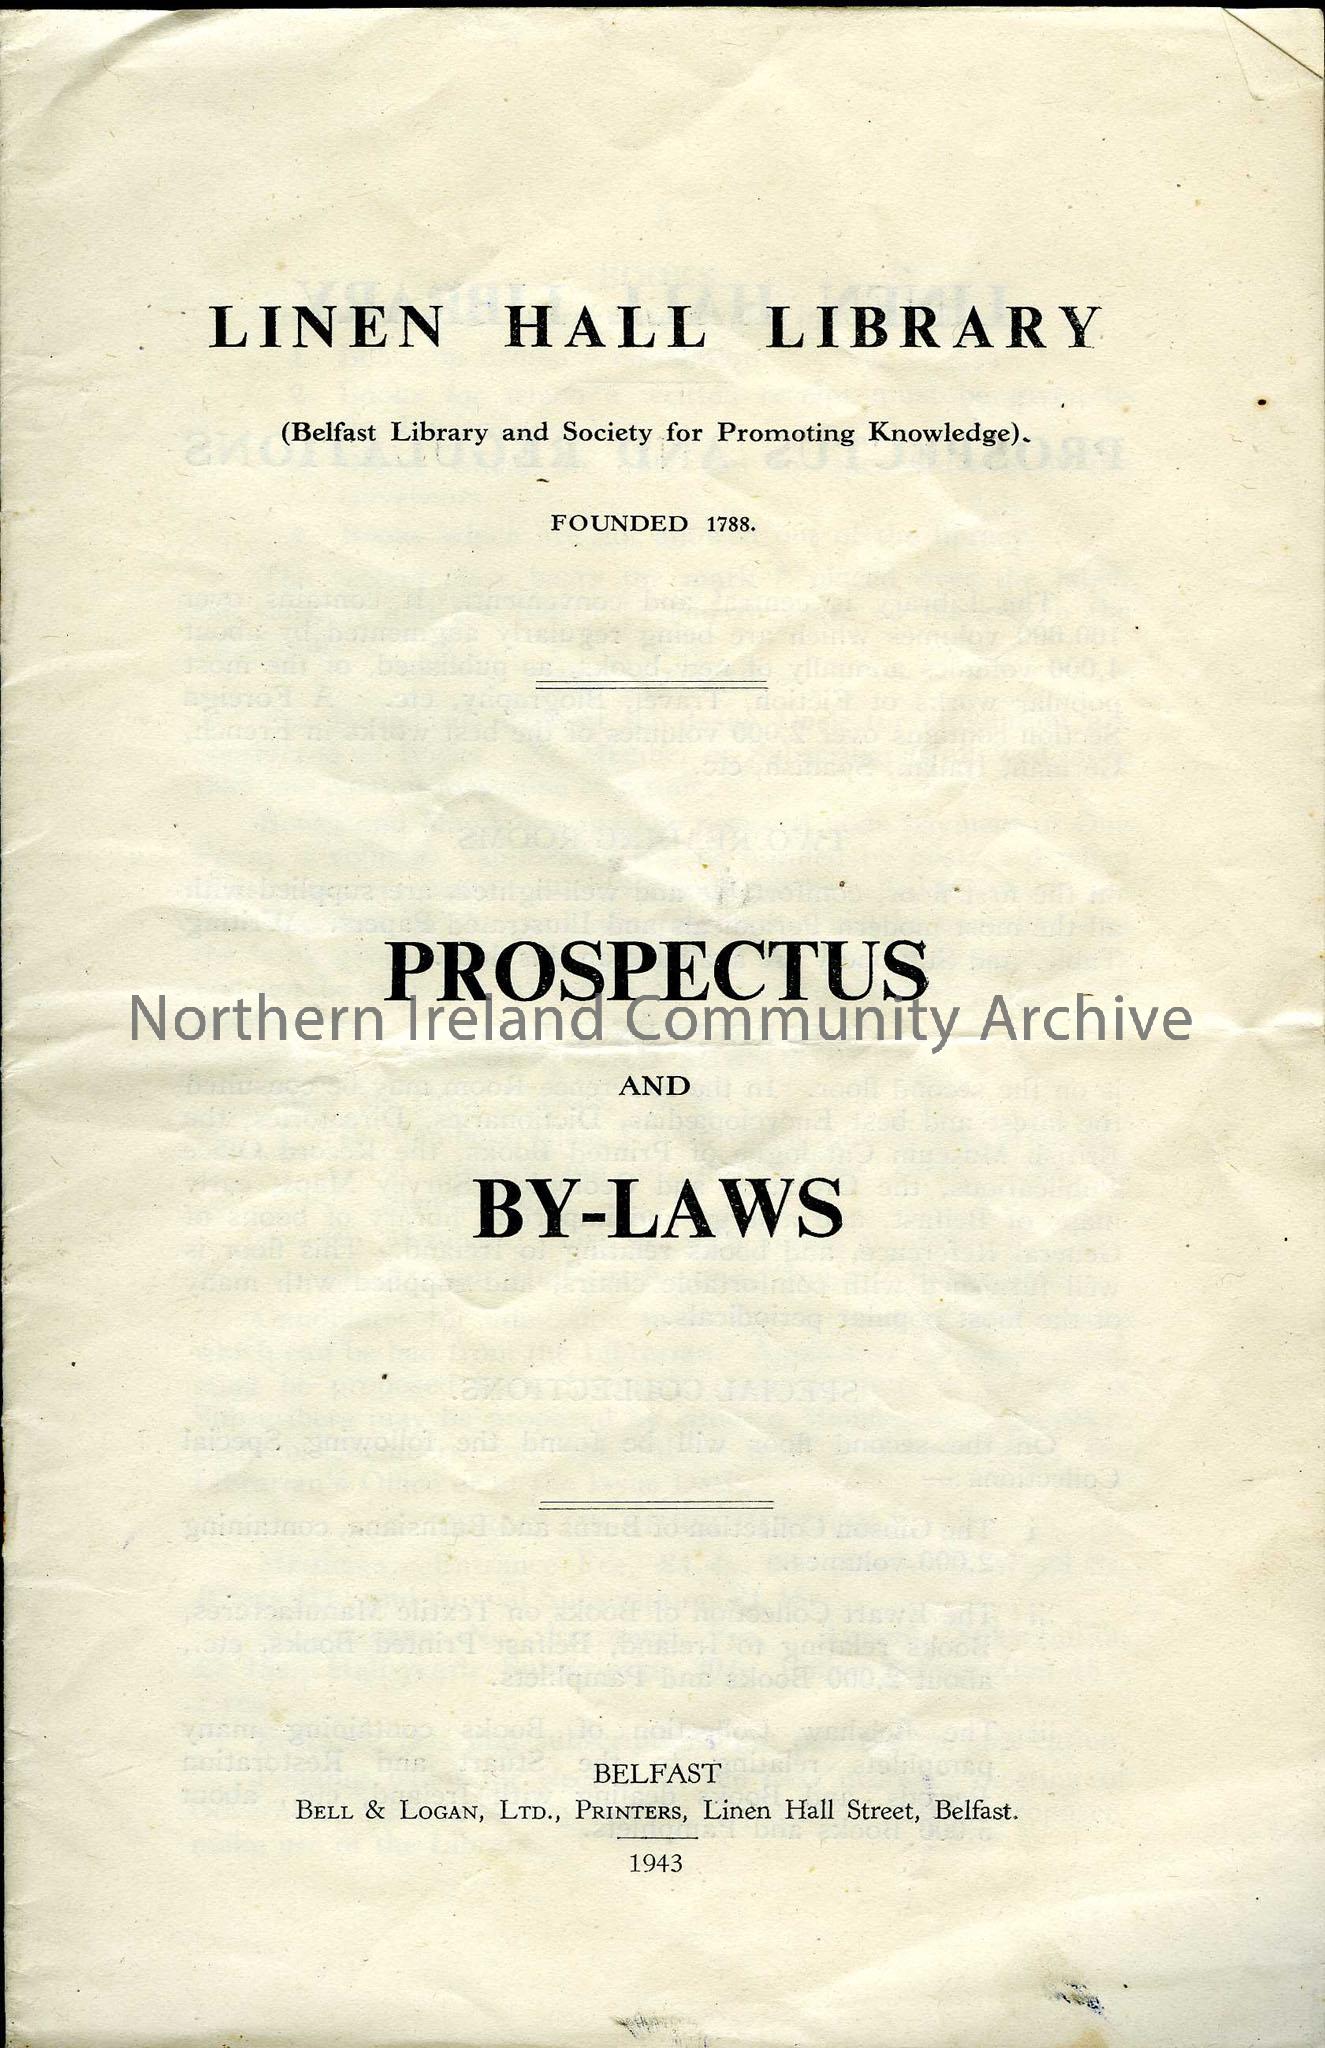 Prospectus and By-Laws